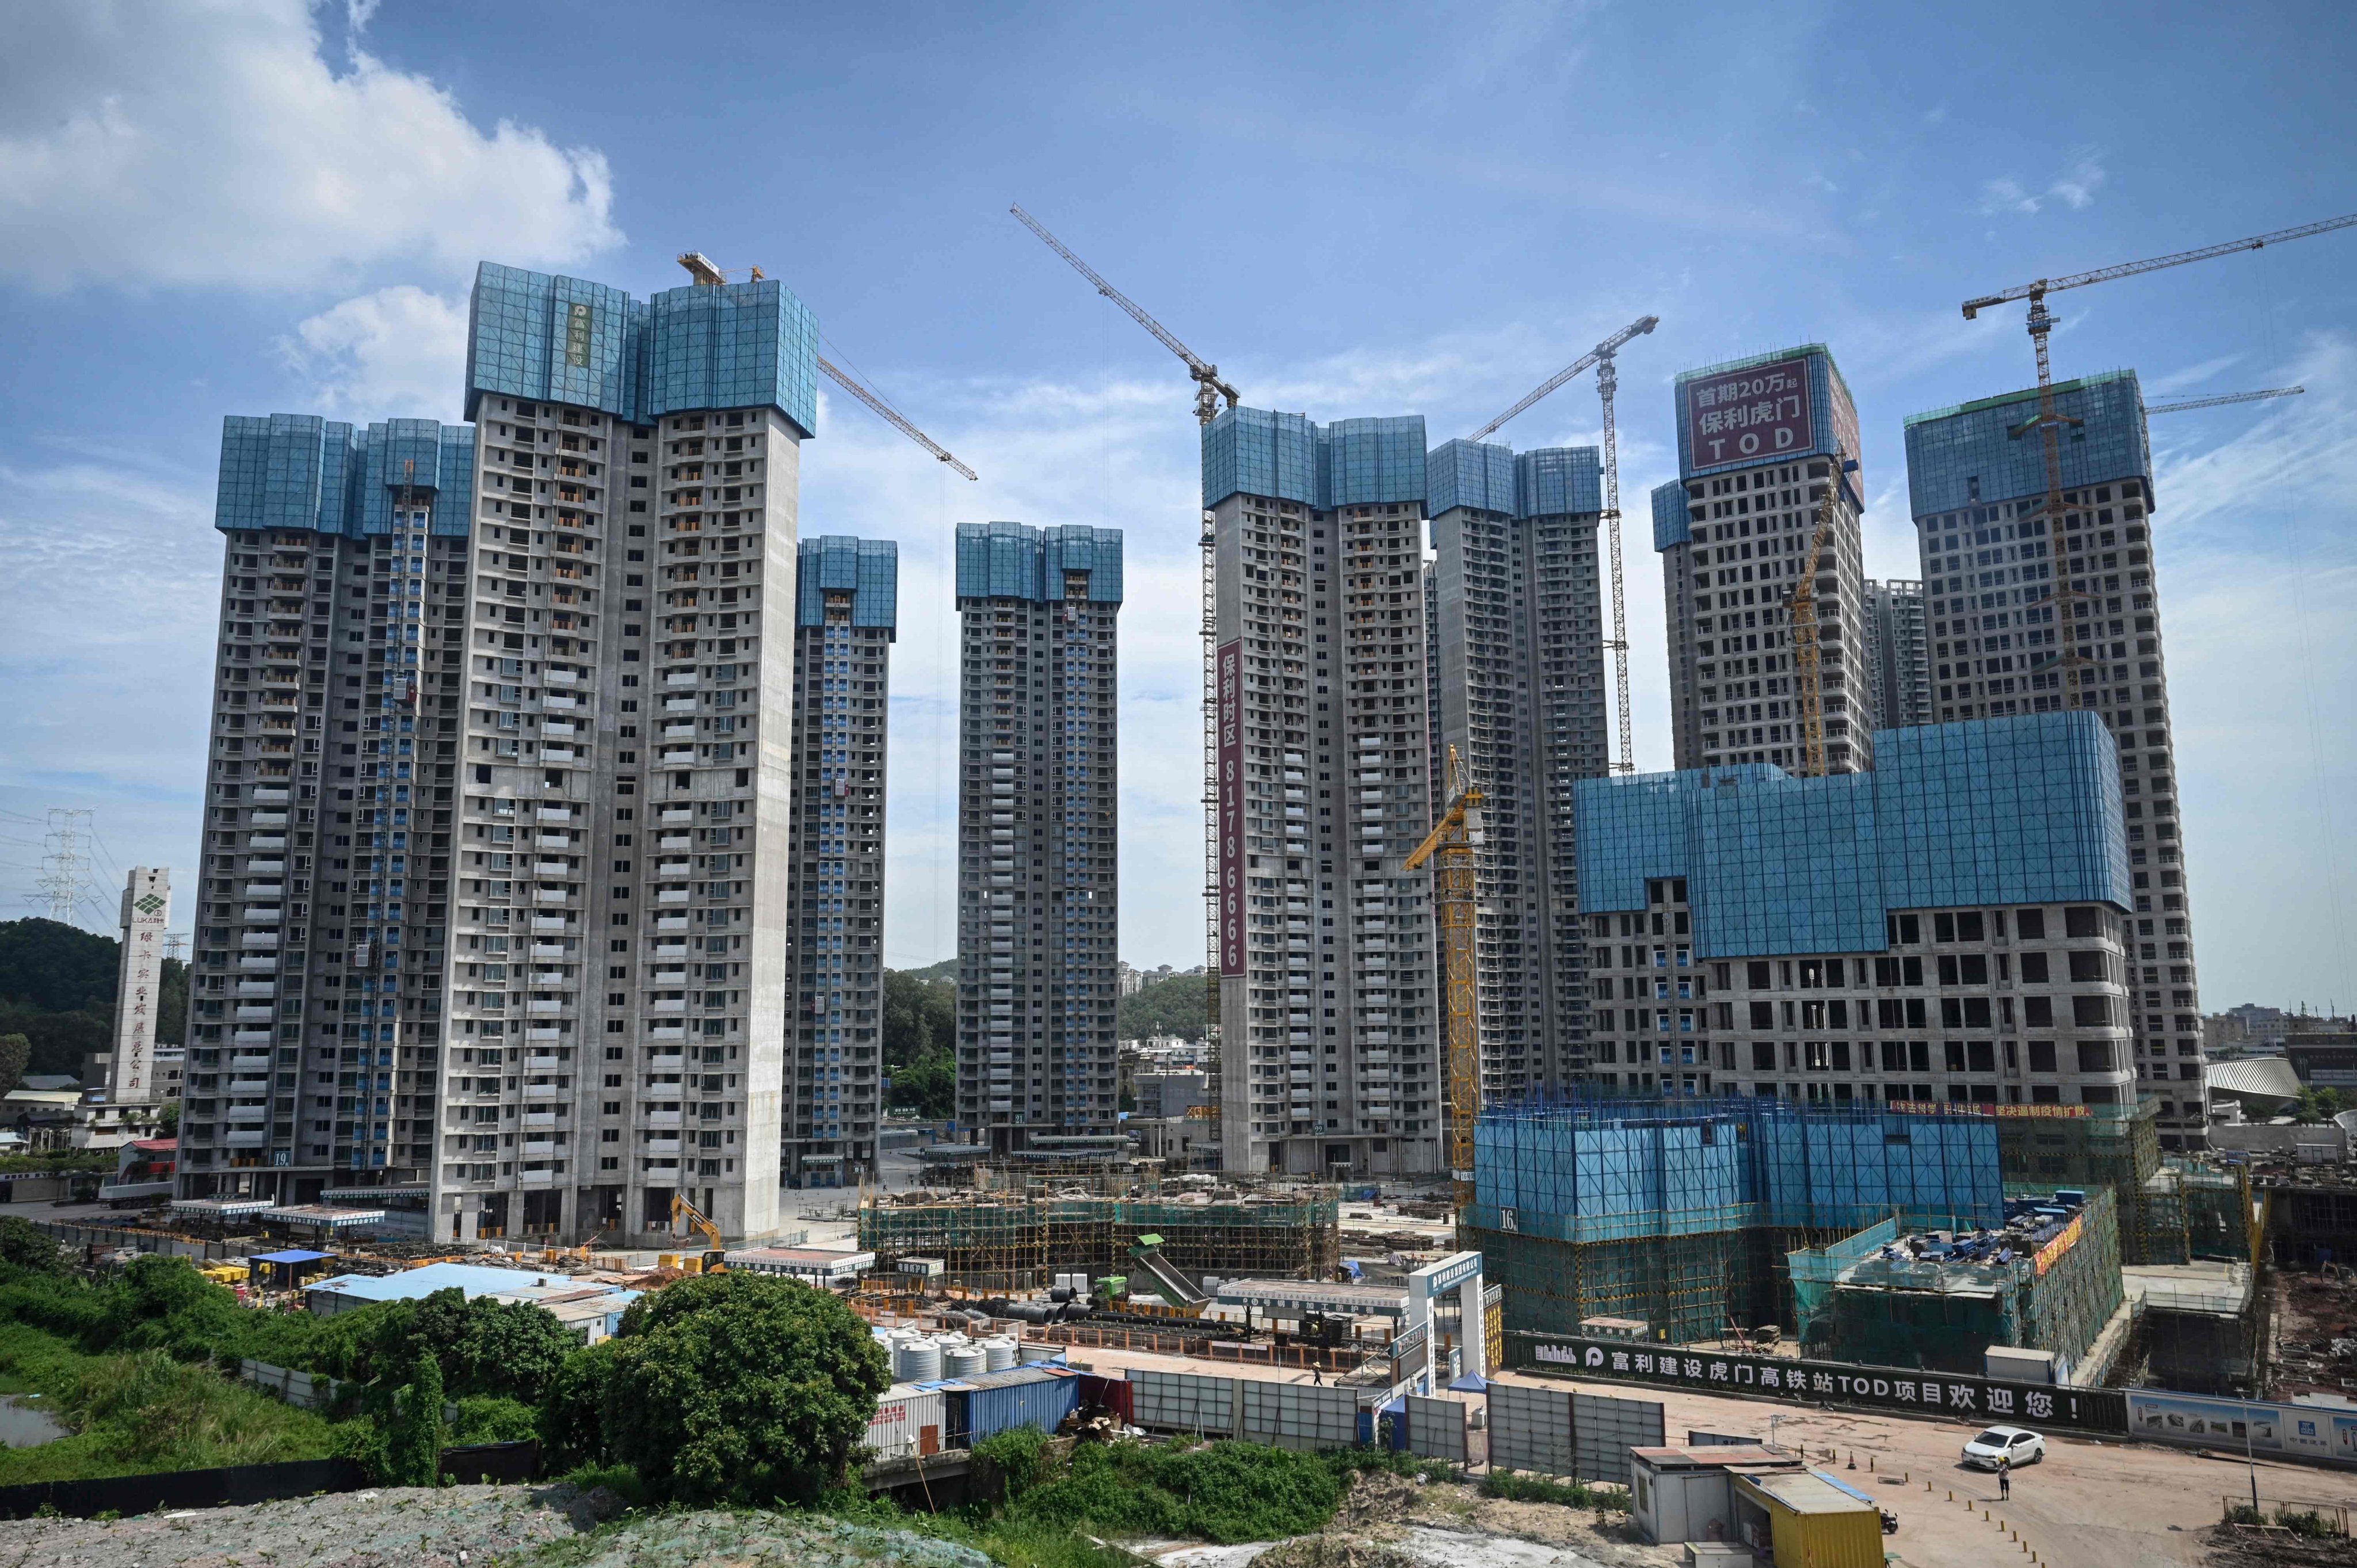 An under-construction housing complex in Dongguan, in China’s southern Guangdong province. China’s tier-1 and tier-2 cities are expected to lead growth with stronger housing demand and new launches, while lower tier cities are forecast to face inventory pressures amid more sluggish sales. Photo: AFP